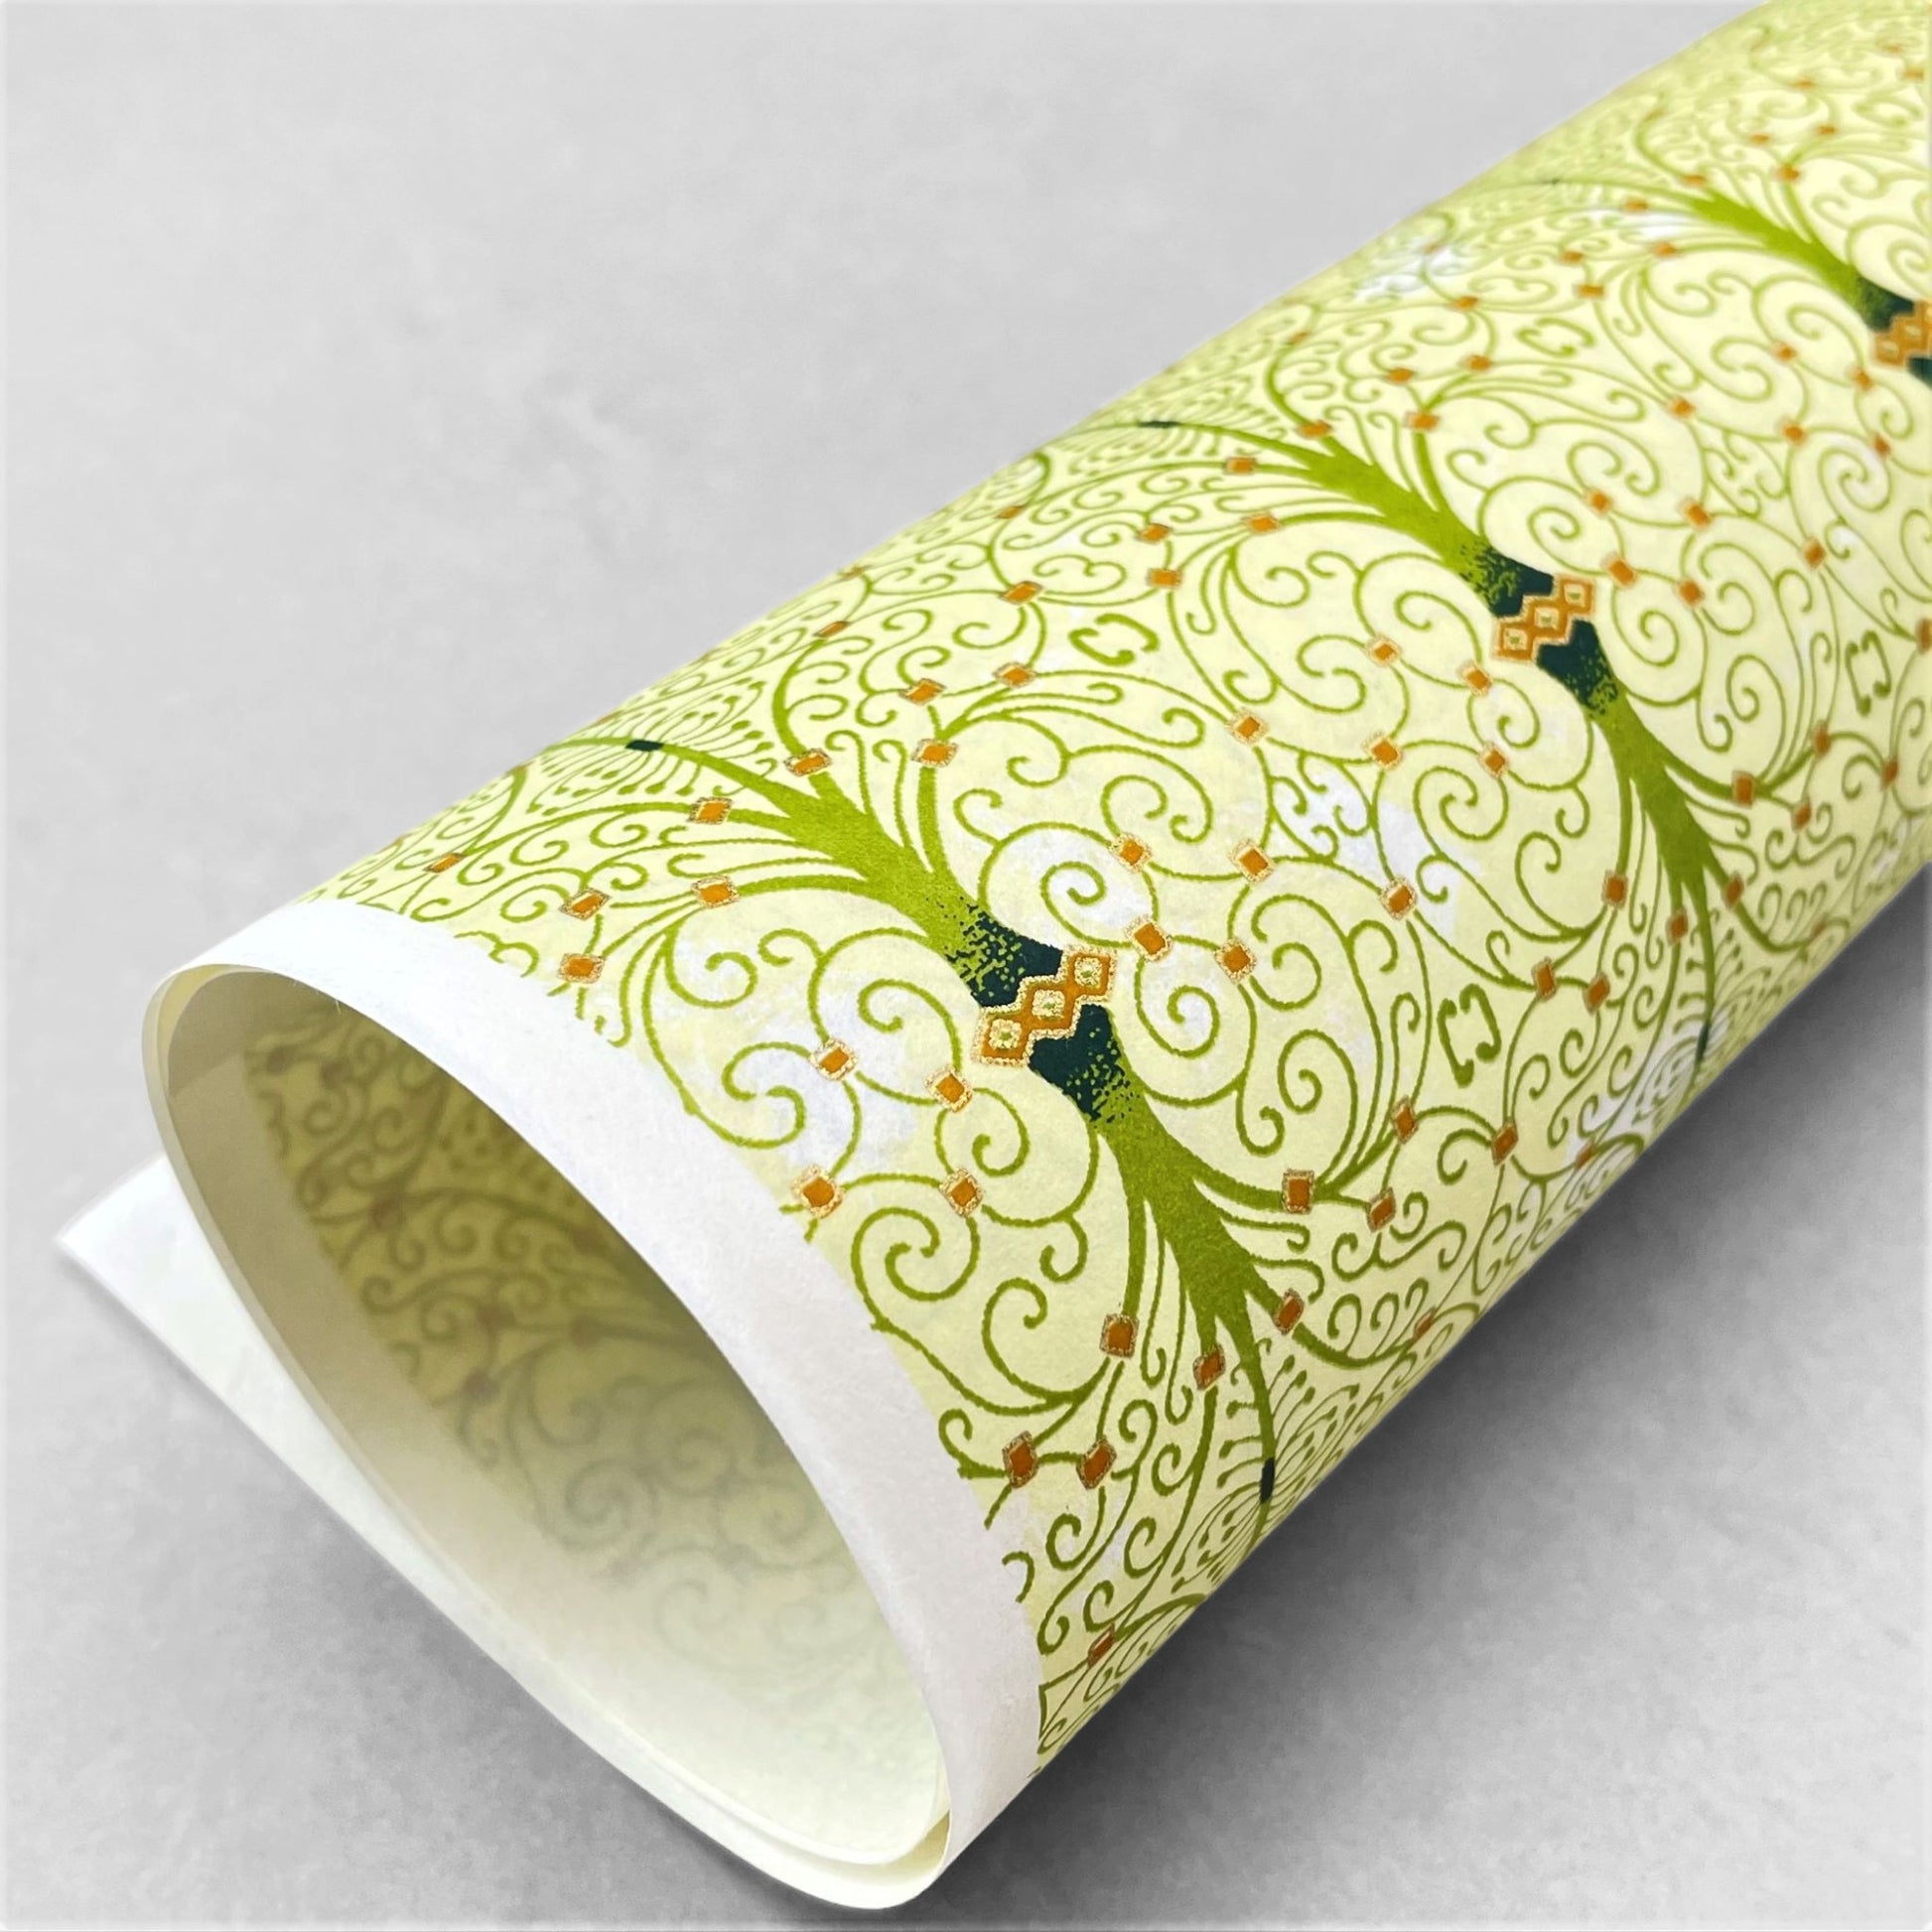 japanese silk-screen handmade paper showing green filigree pattern with gold accents